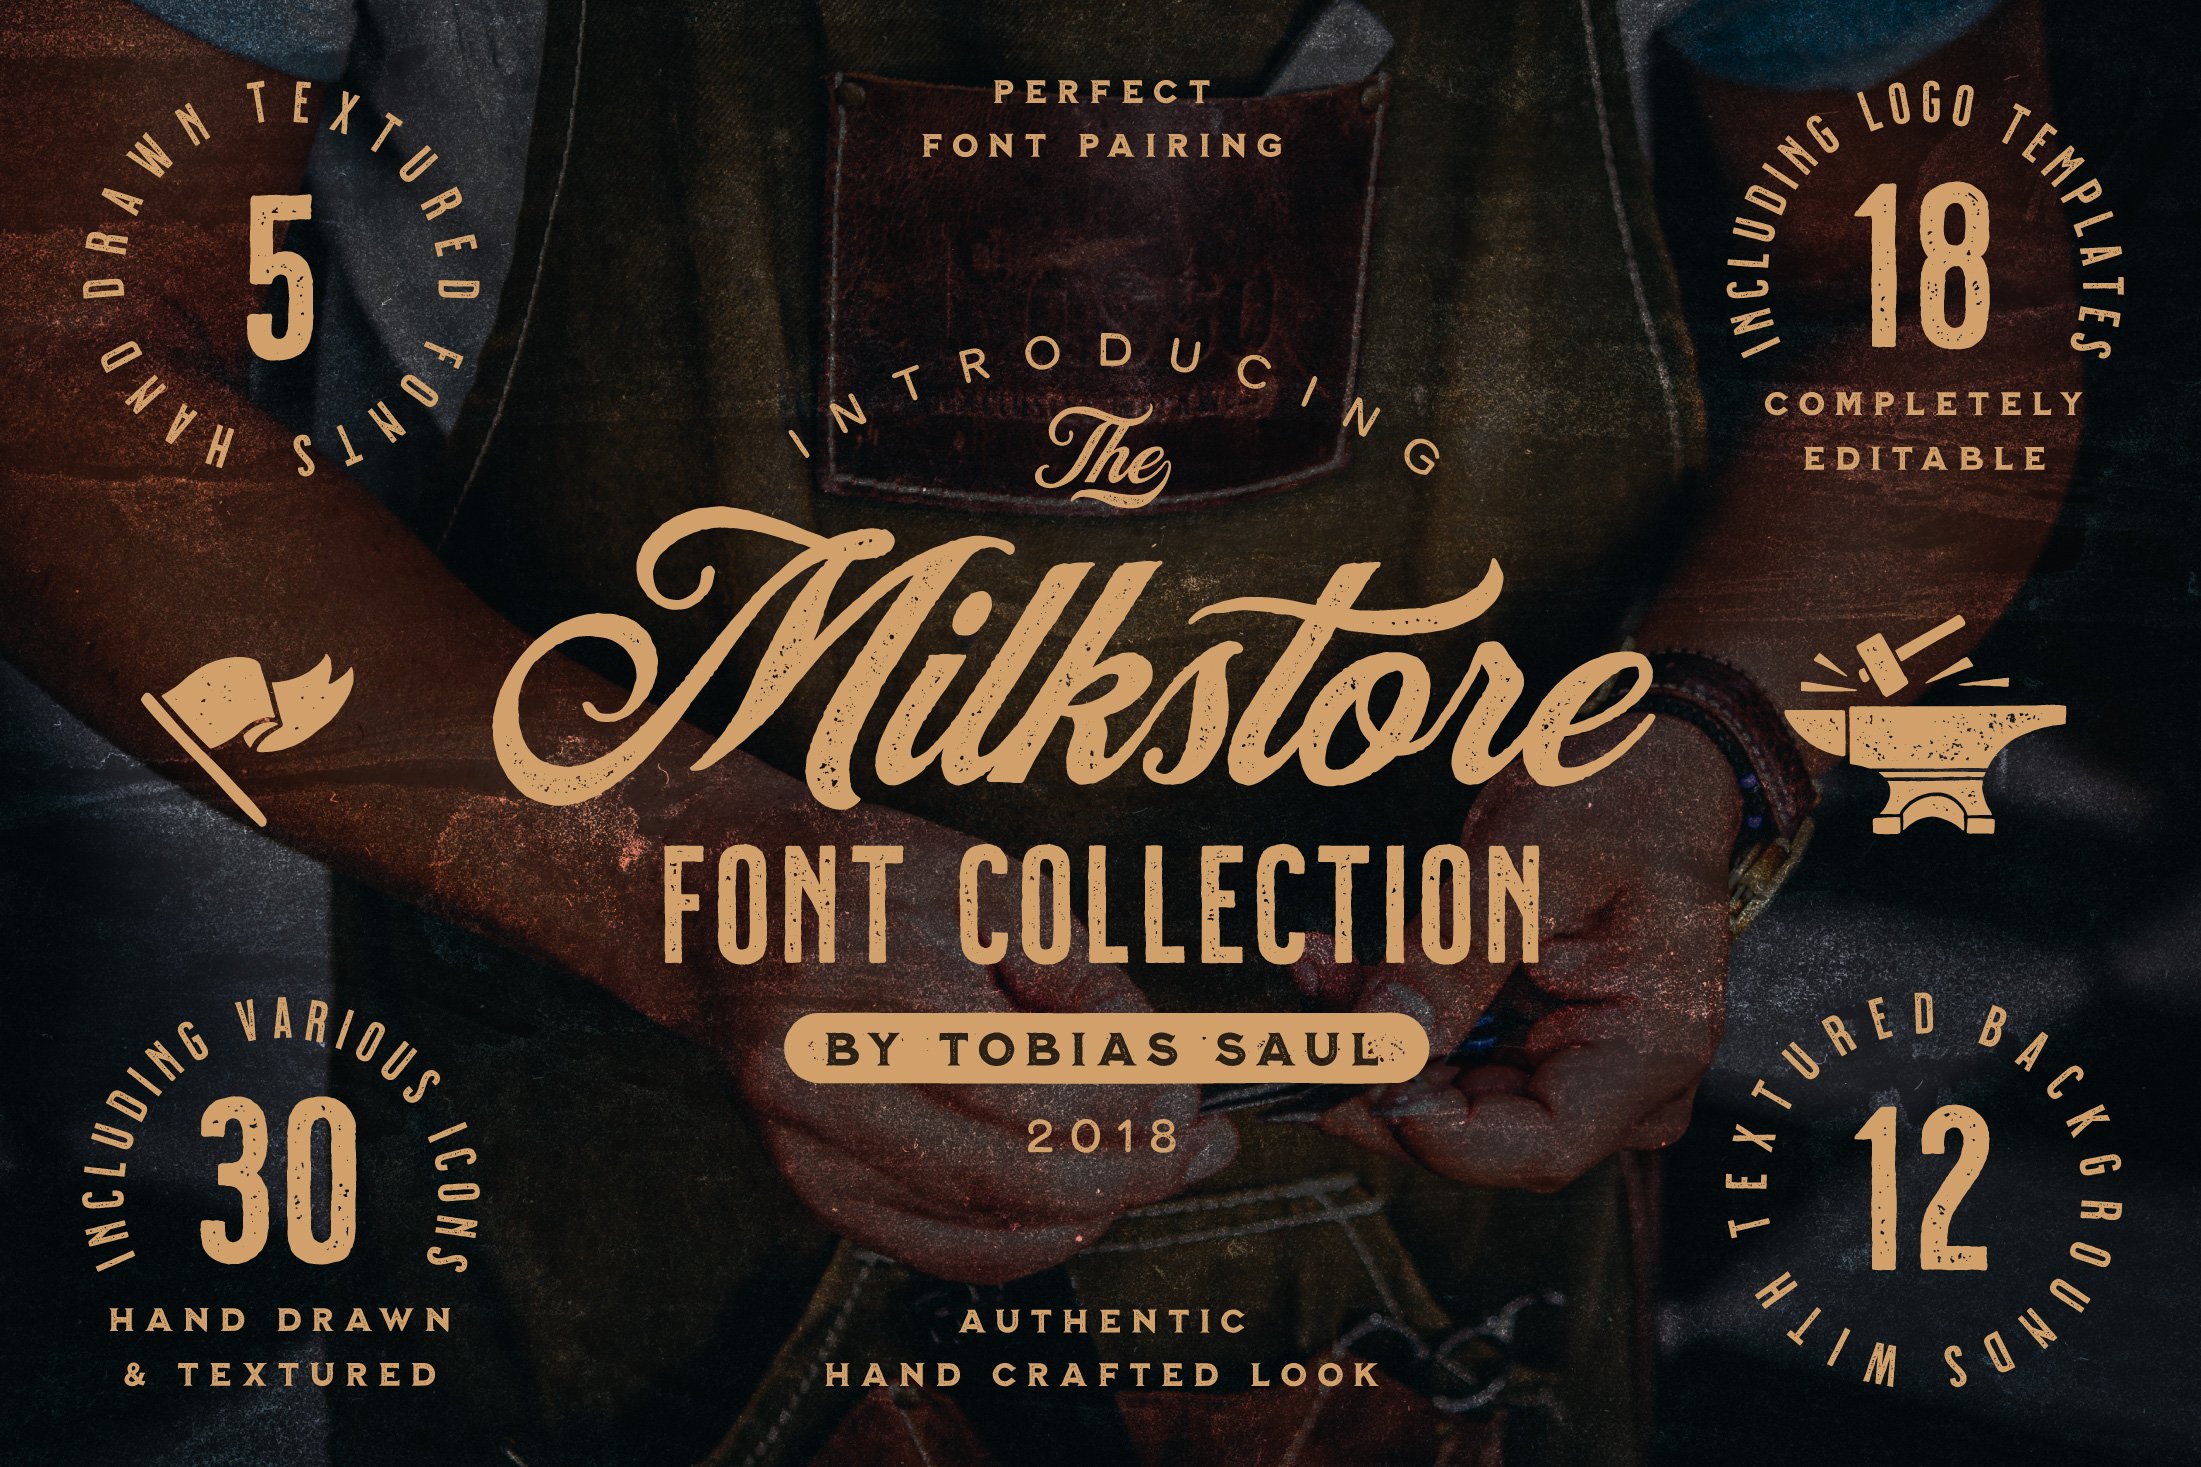 Milkstore Font Collection cover image.